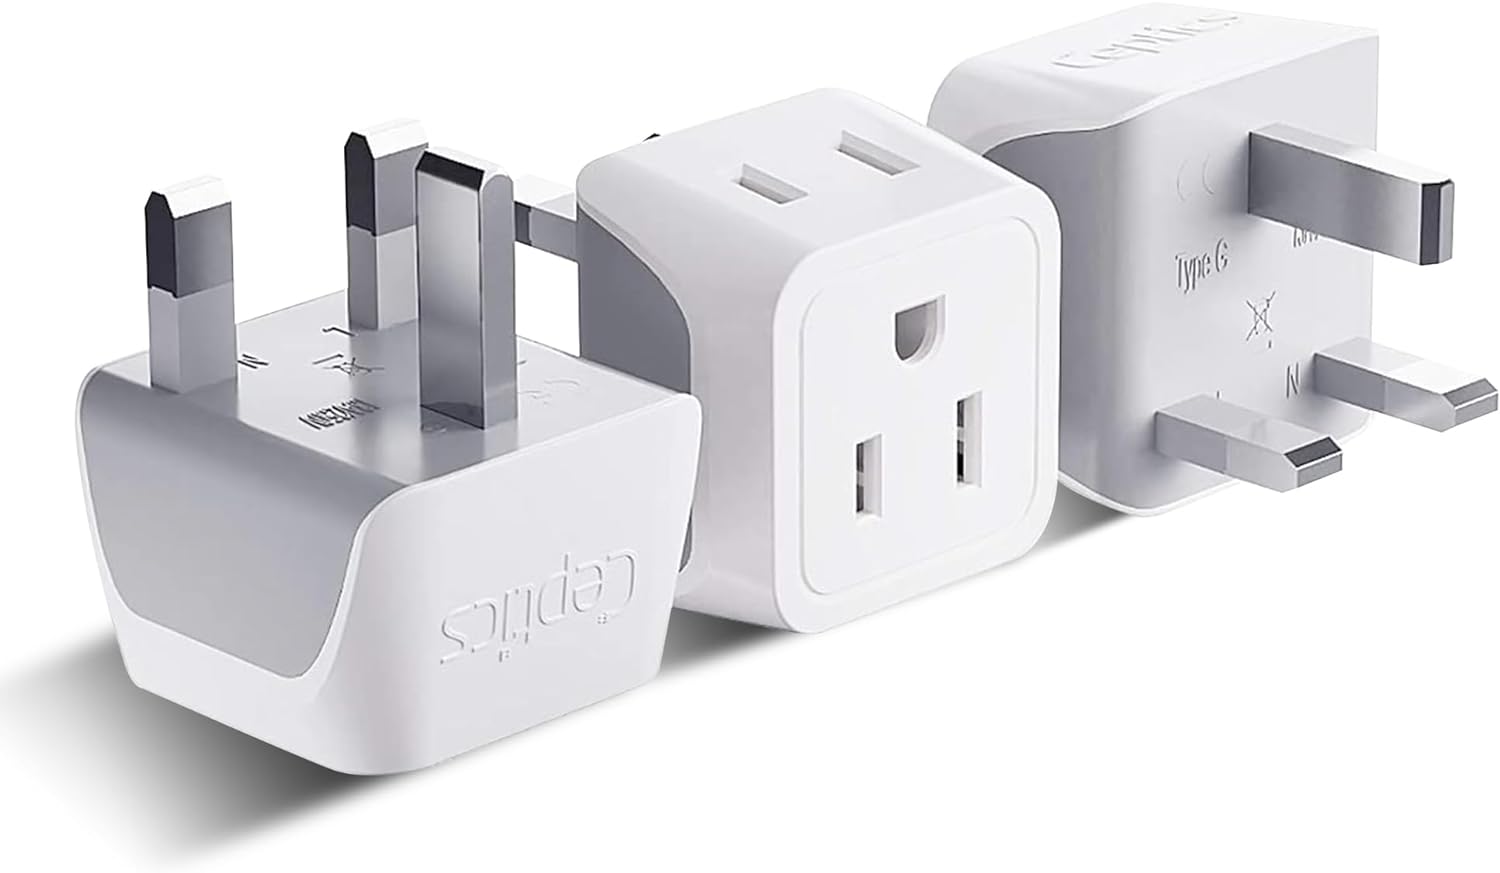 Purchase 6 of these little guys, they worked perfectly in New Zealand. Their small size allows for both outlets of a wall receptacle to be accessible. And they support both 3-prong and 2-prong AC cords. They're small but not cheap. Well made, will be using them on future travels for sure.